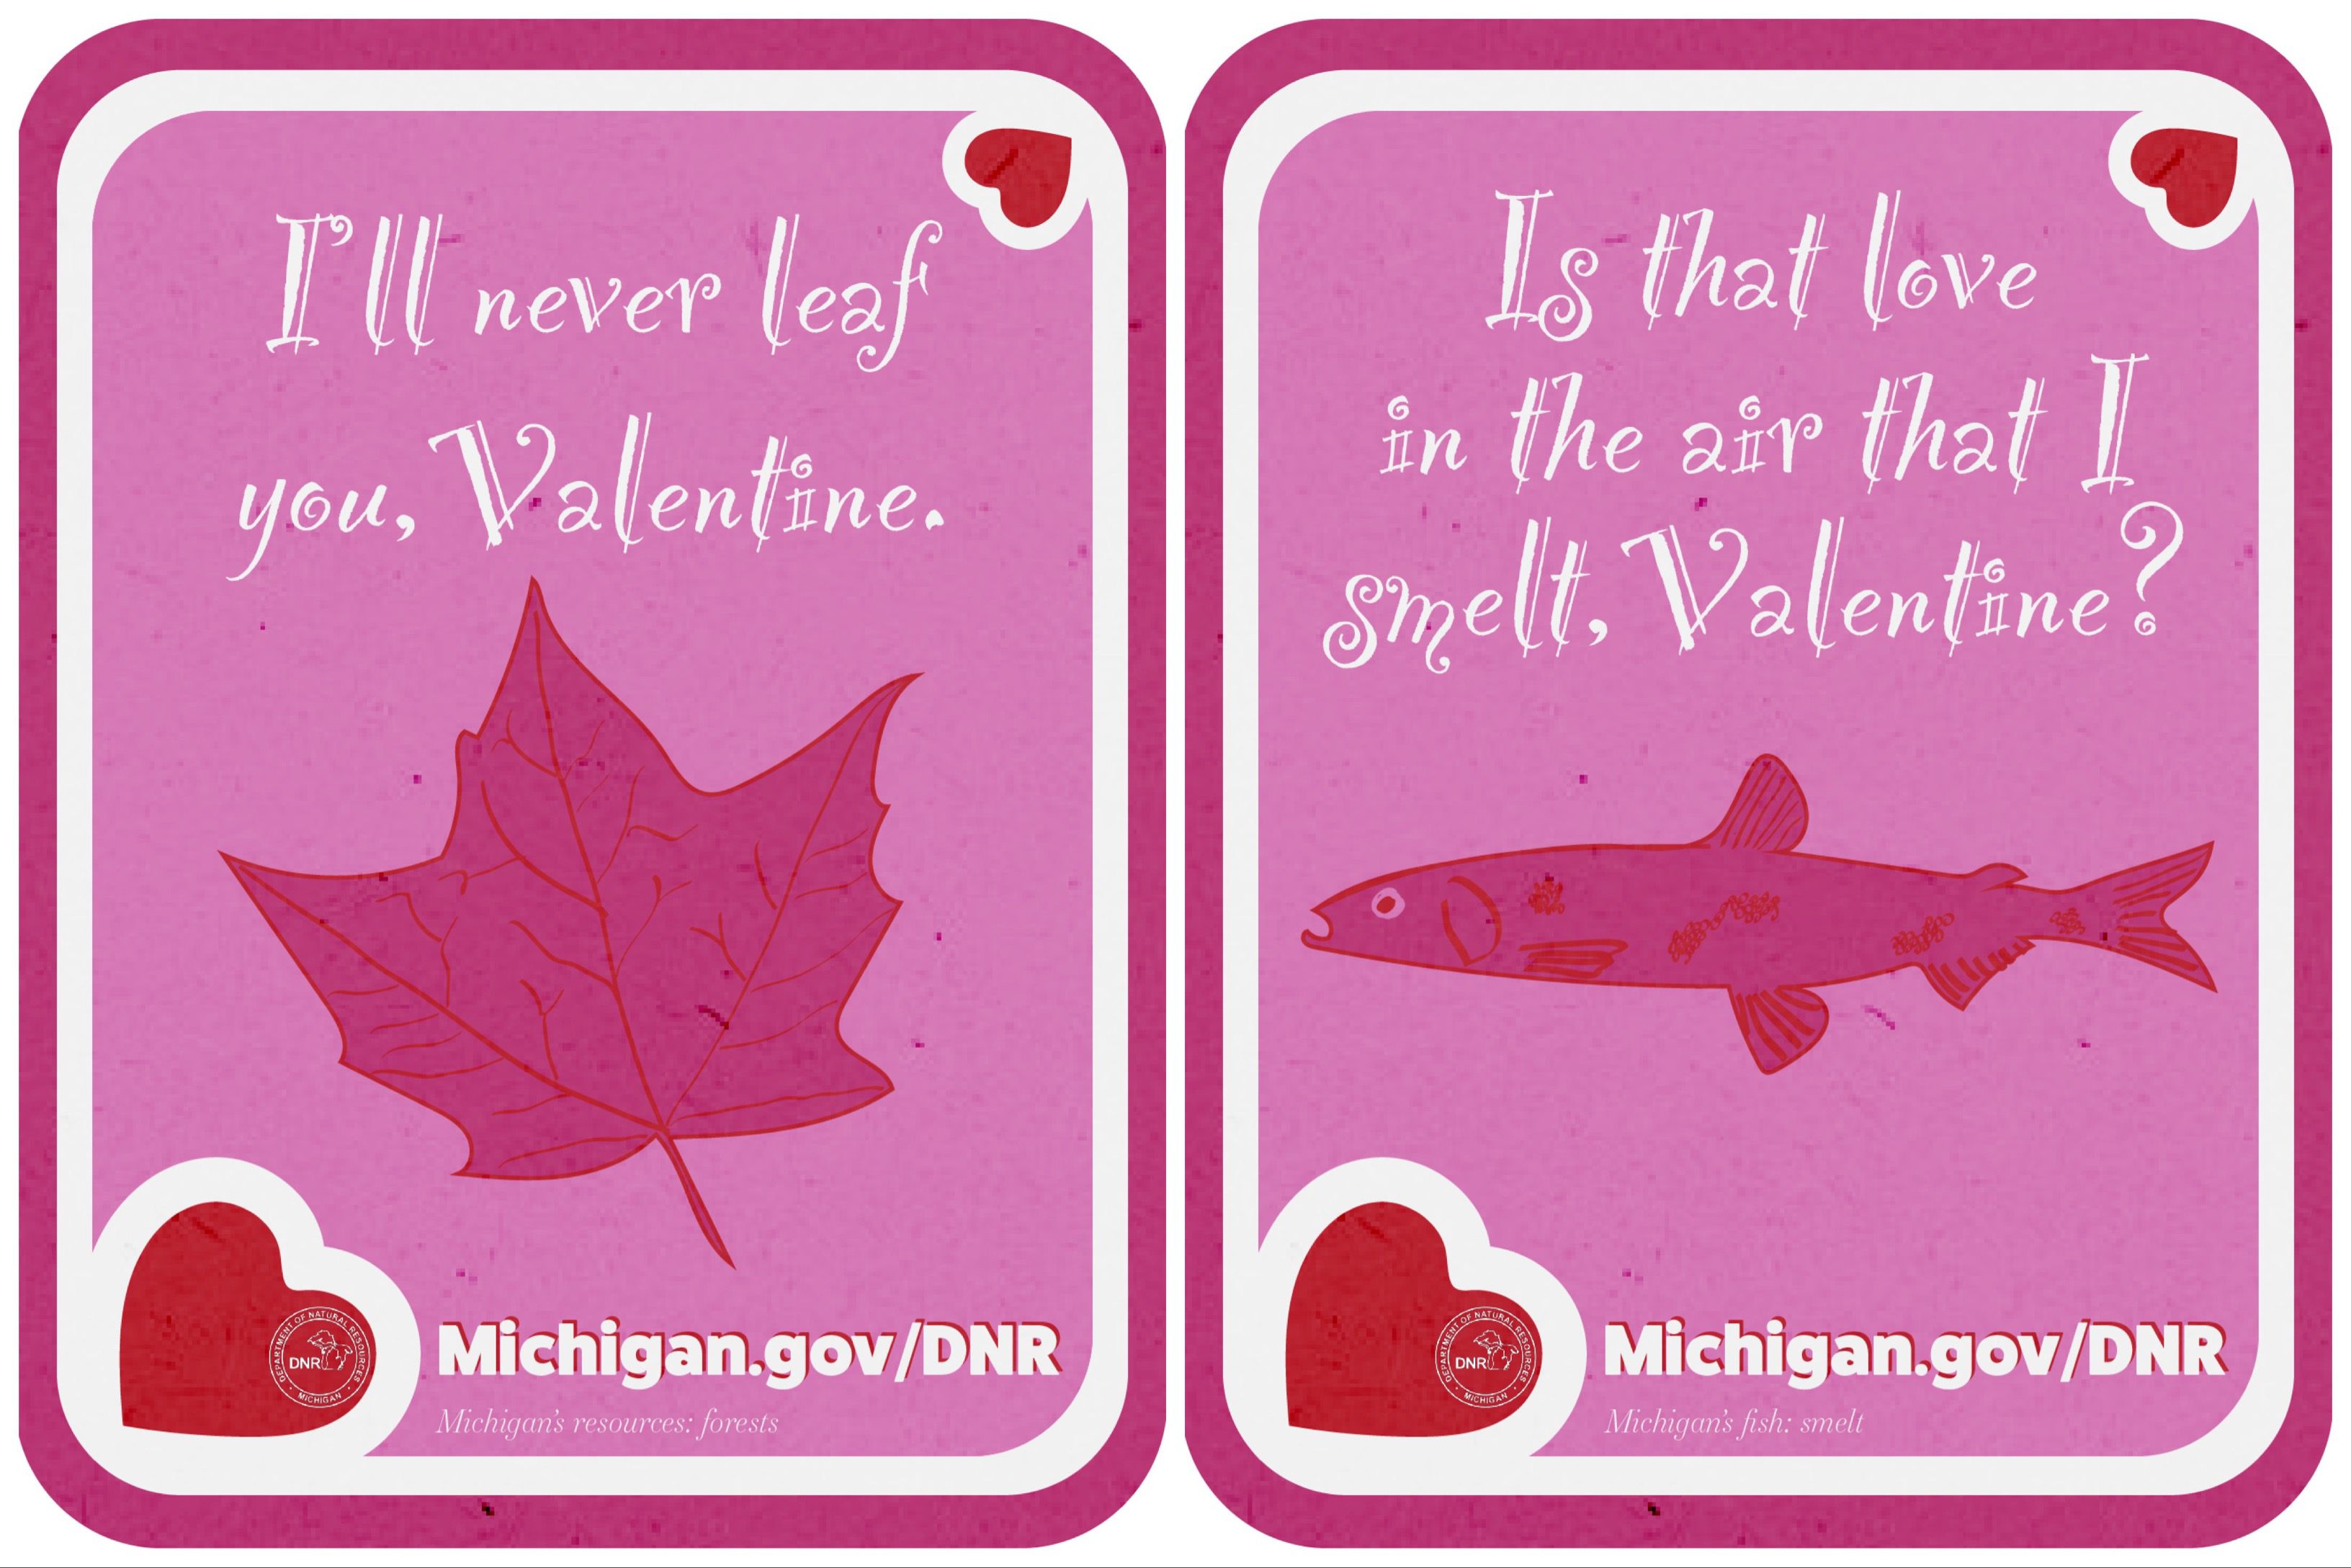 DNR releases 'pun-derful' Valentine's Day cards for sharing